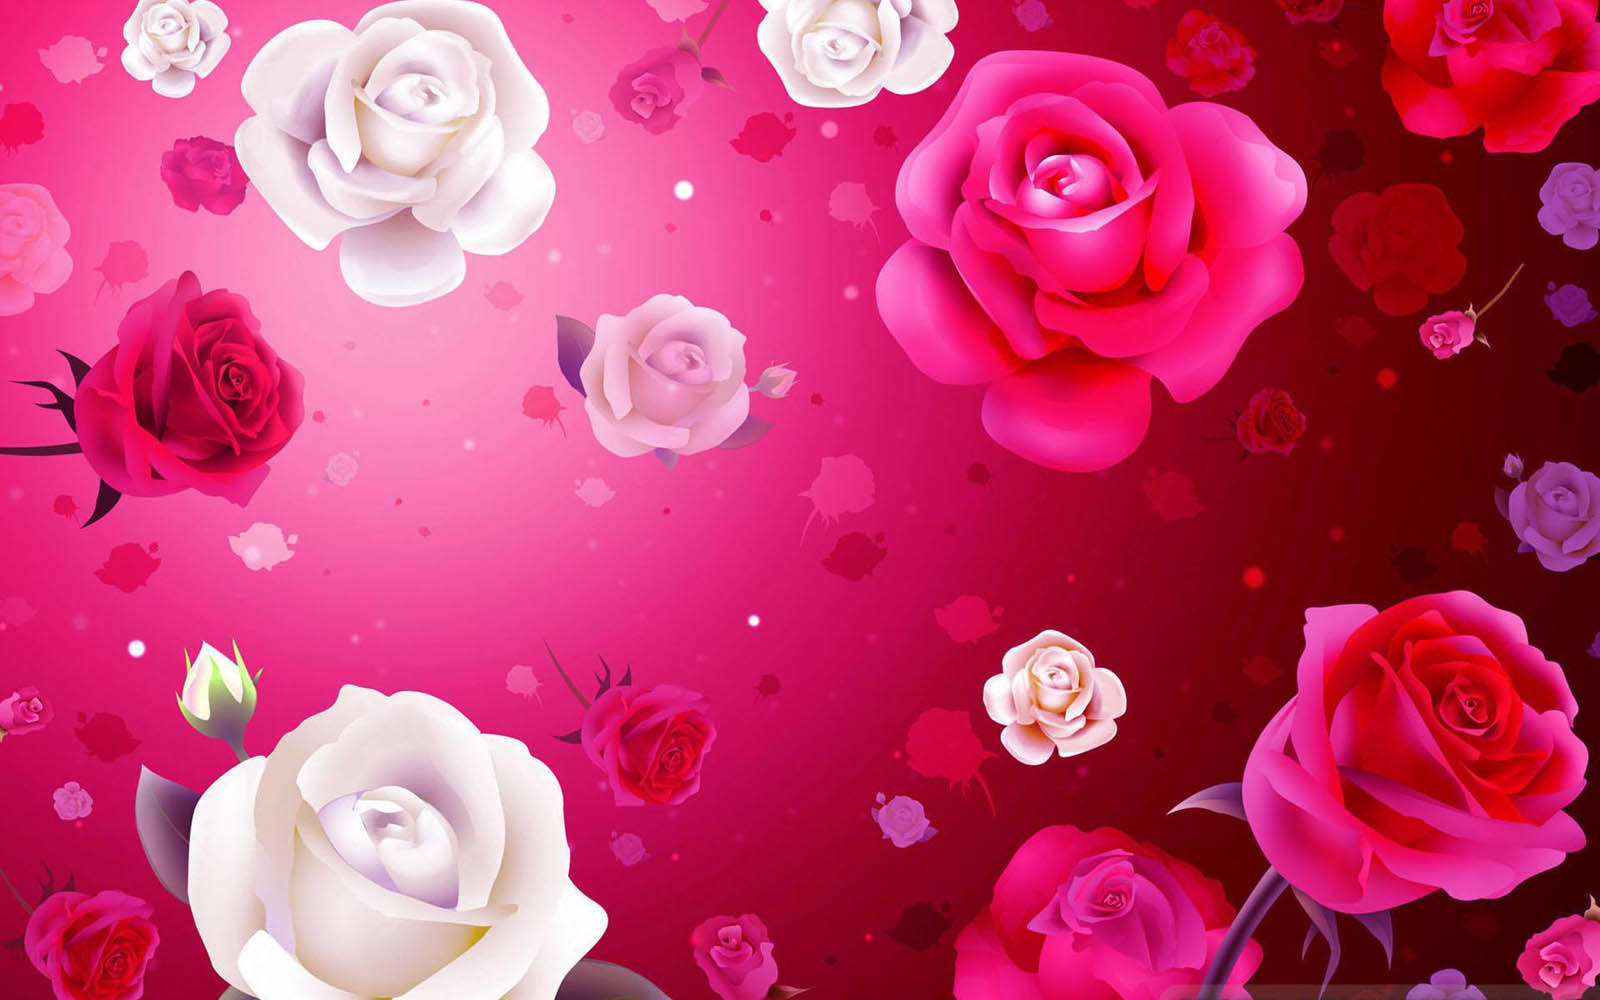 Colorful Roses For Valentine's Day Wallpaper